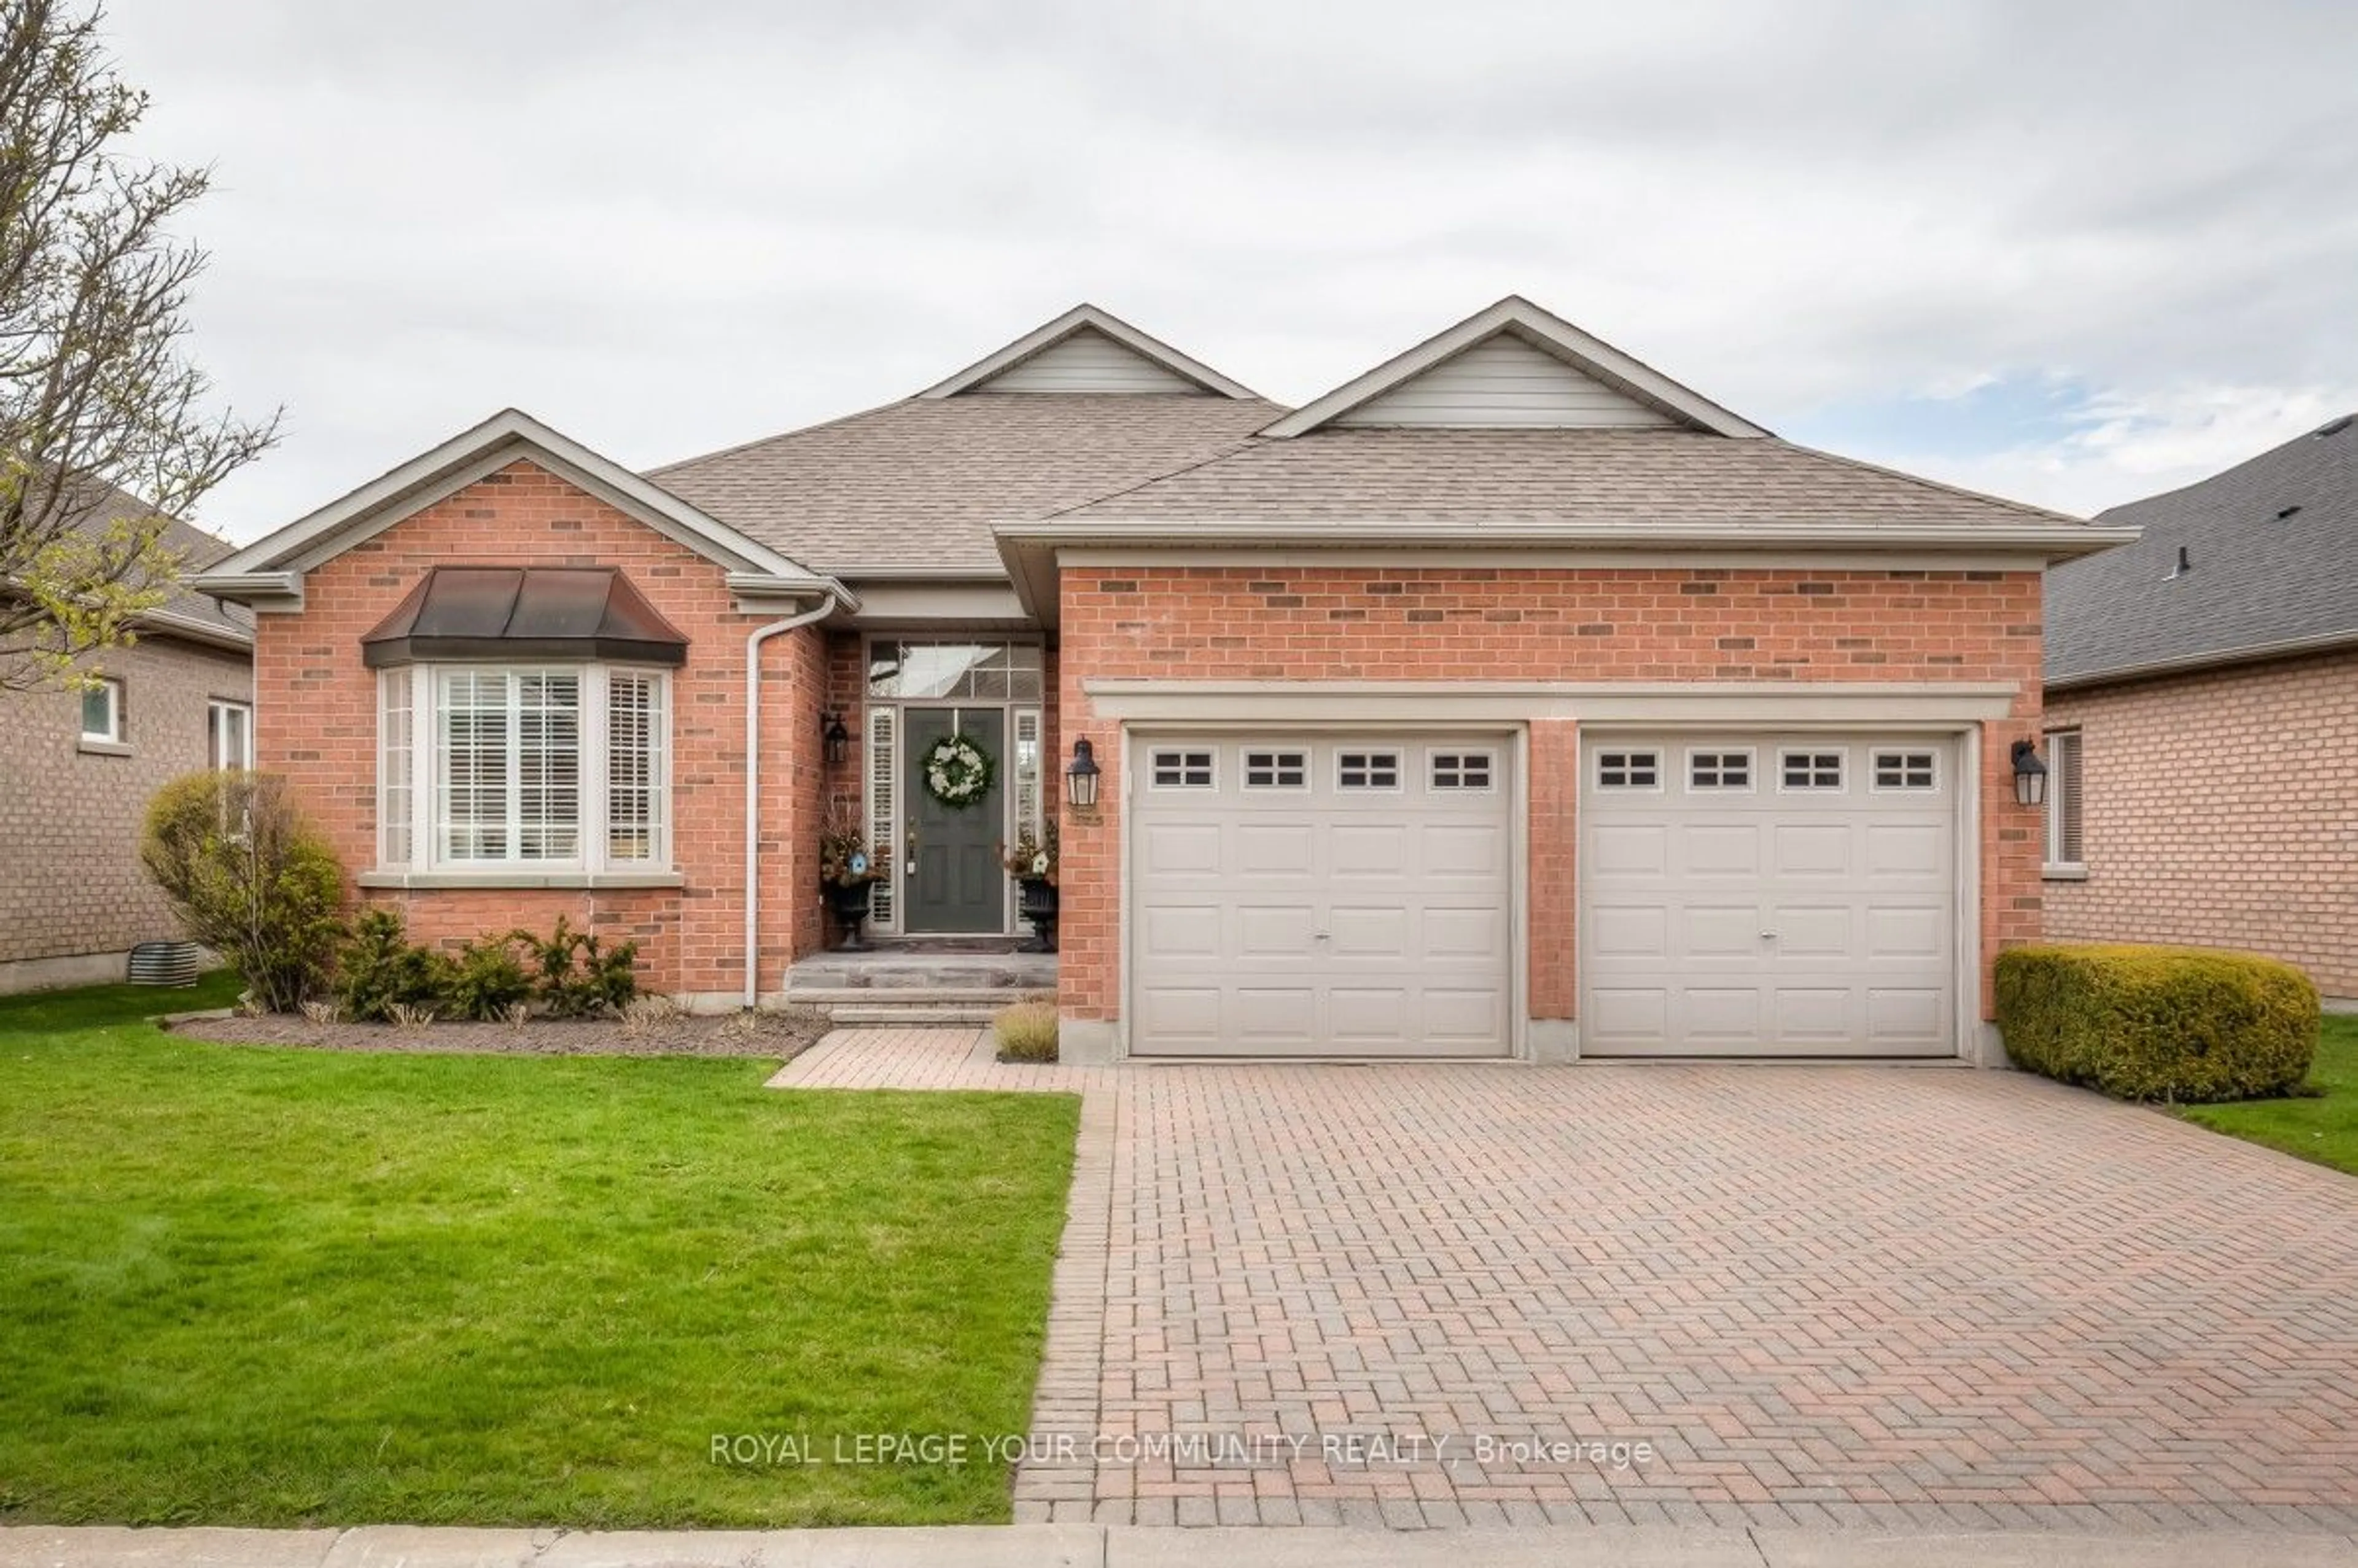 Home with brick exterior material for 14 Long Stan, Whitchurch-Stouffville Ontario L4A 1P5